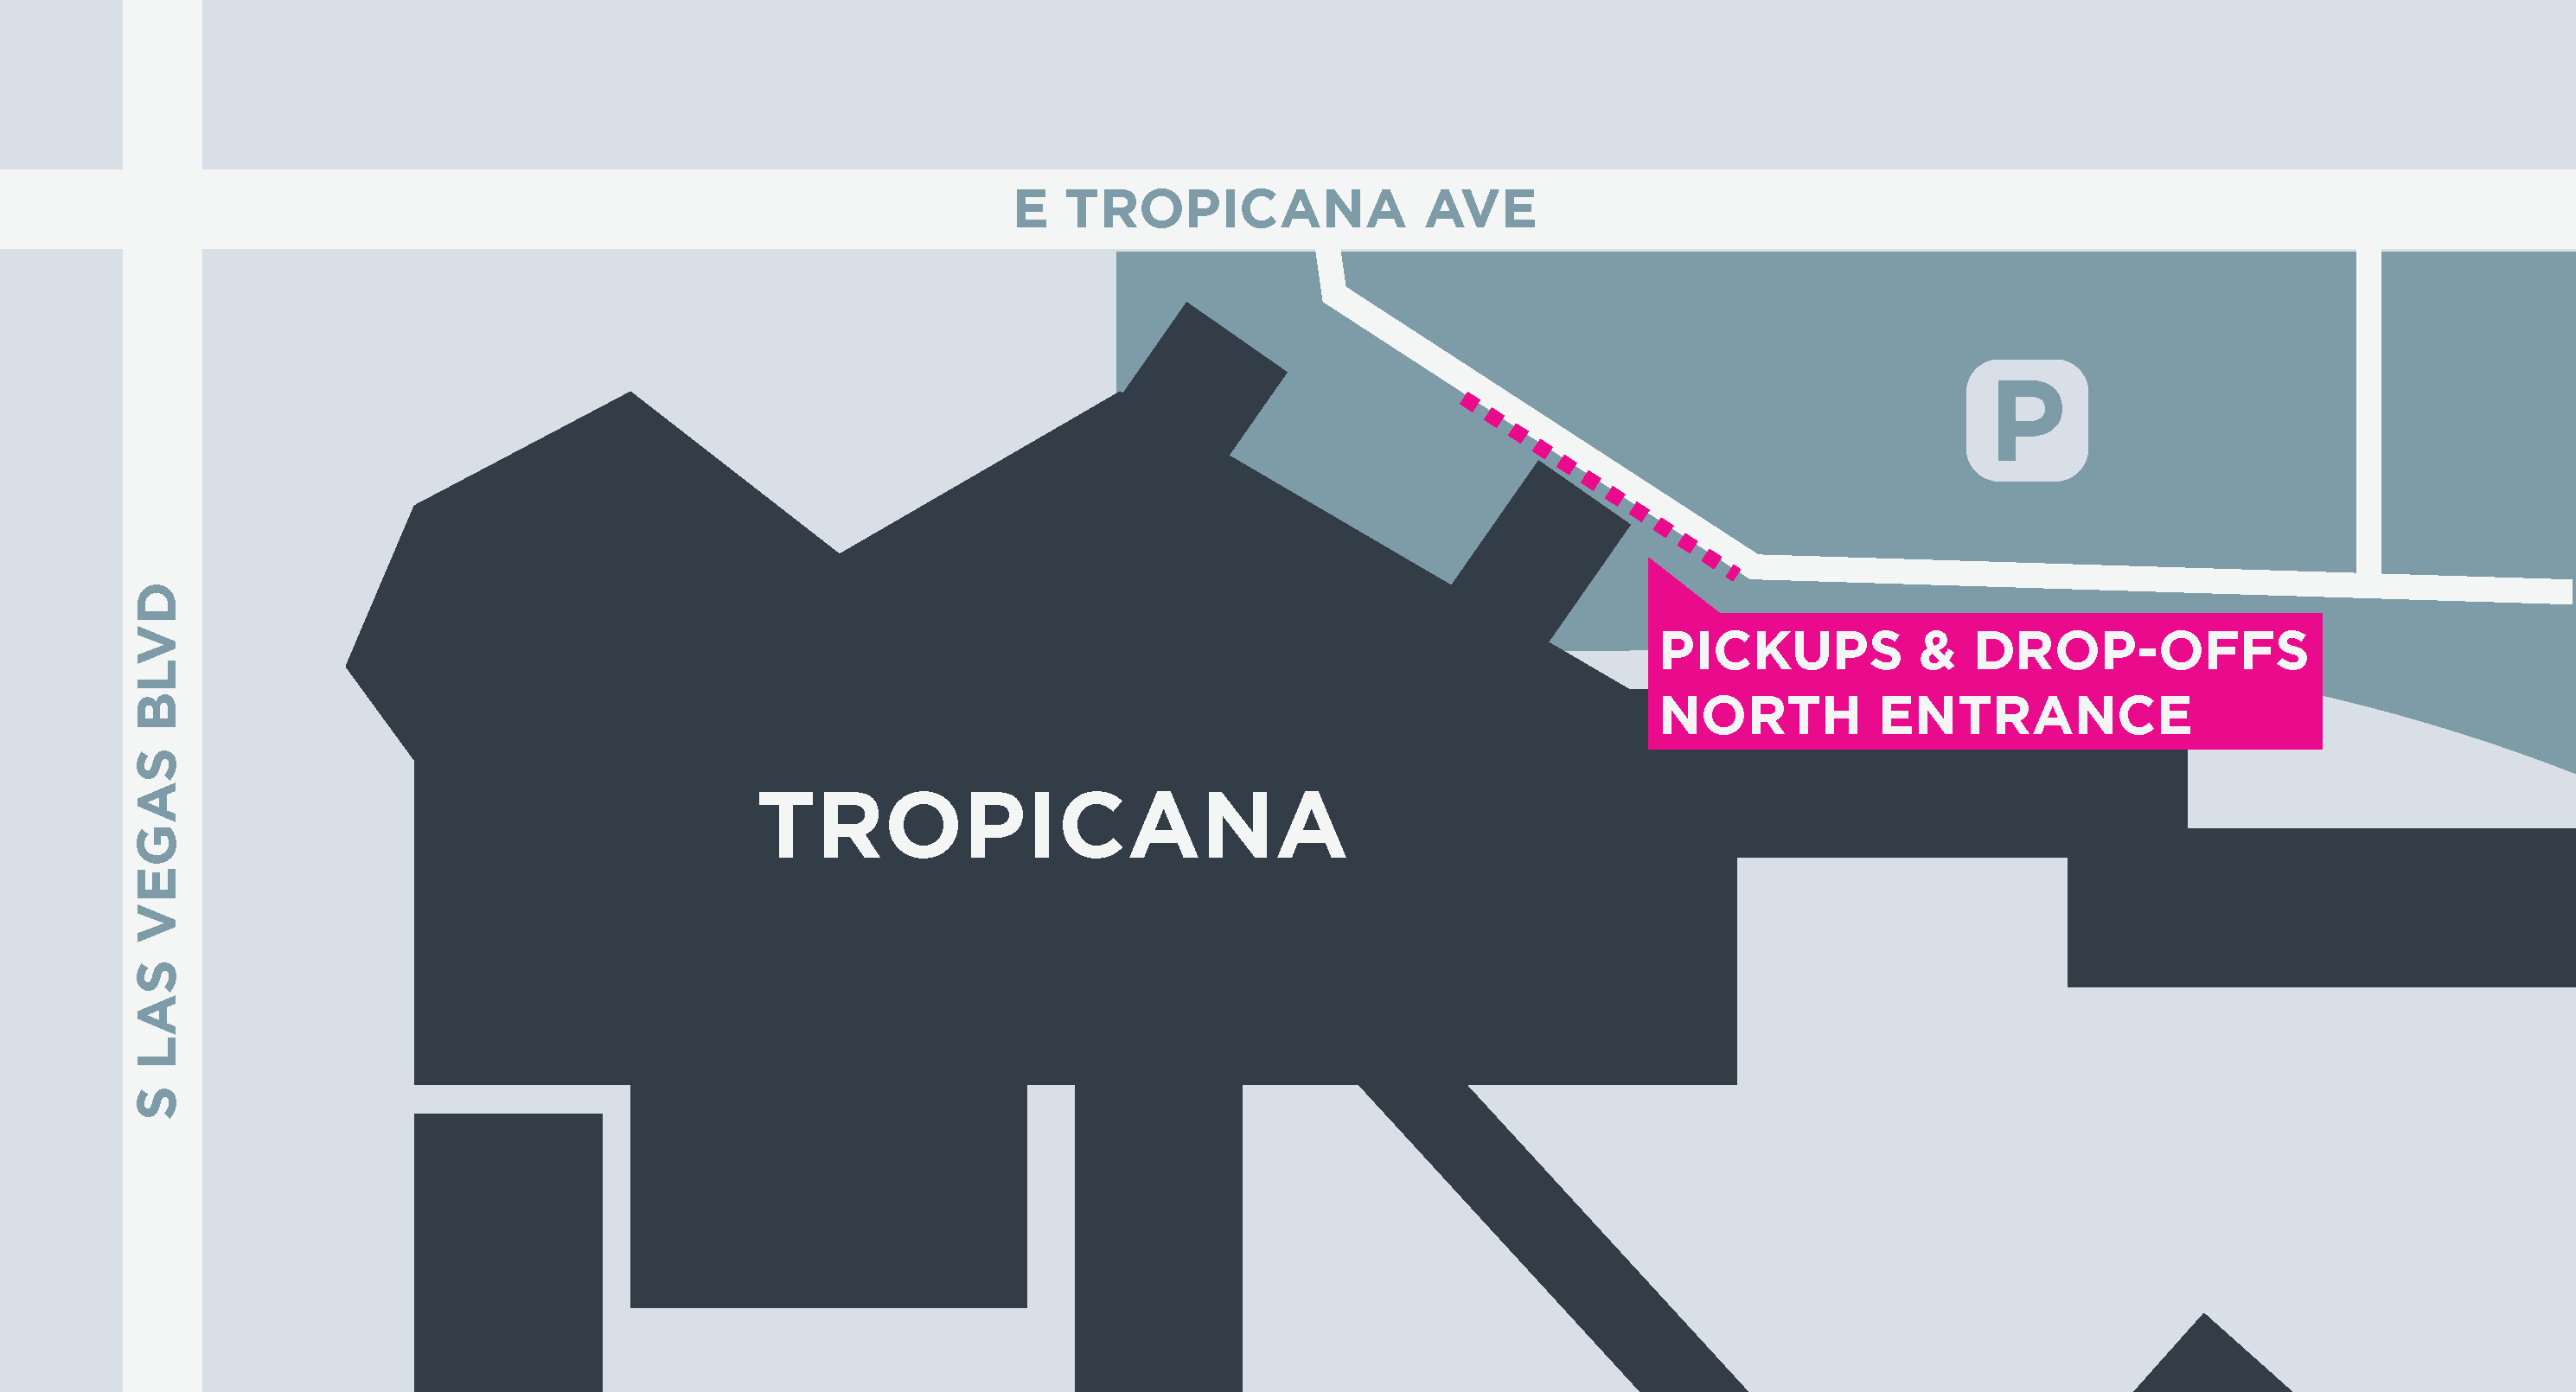 This image shows a map of the Tropicana, including pickup and dropoff areas.